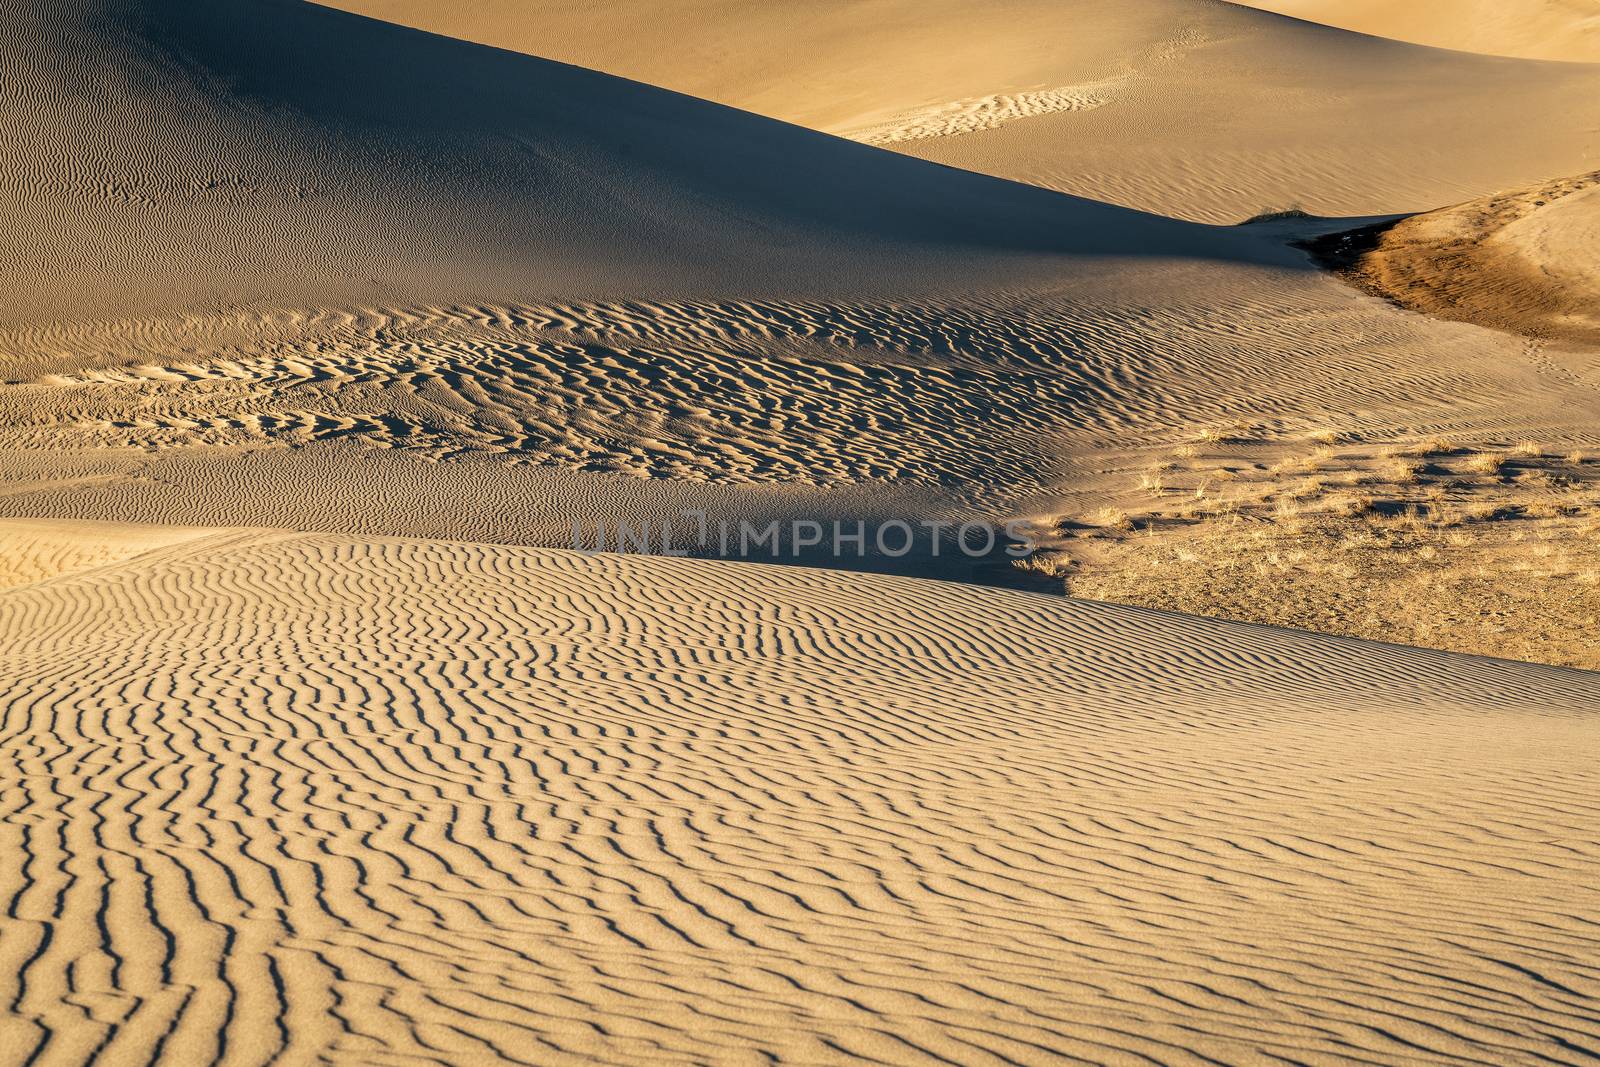 sand dunes patterns and texture at sunset - Great Sand Dunes National Park in Colorado